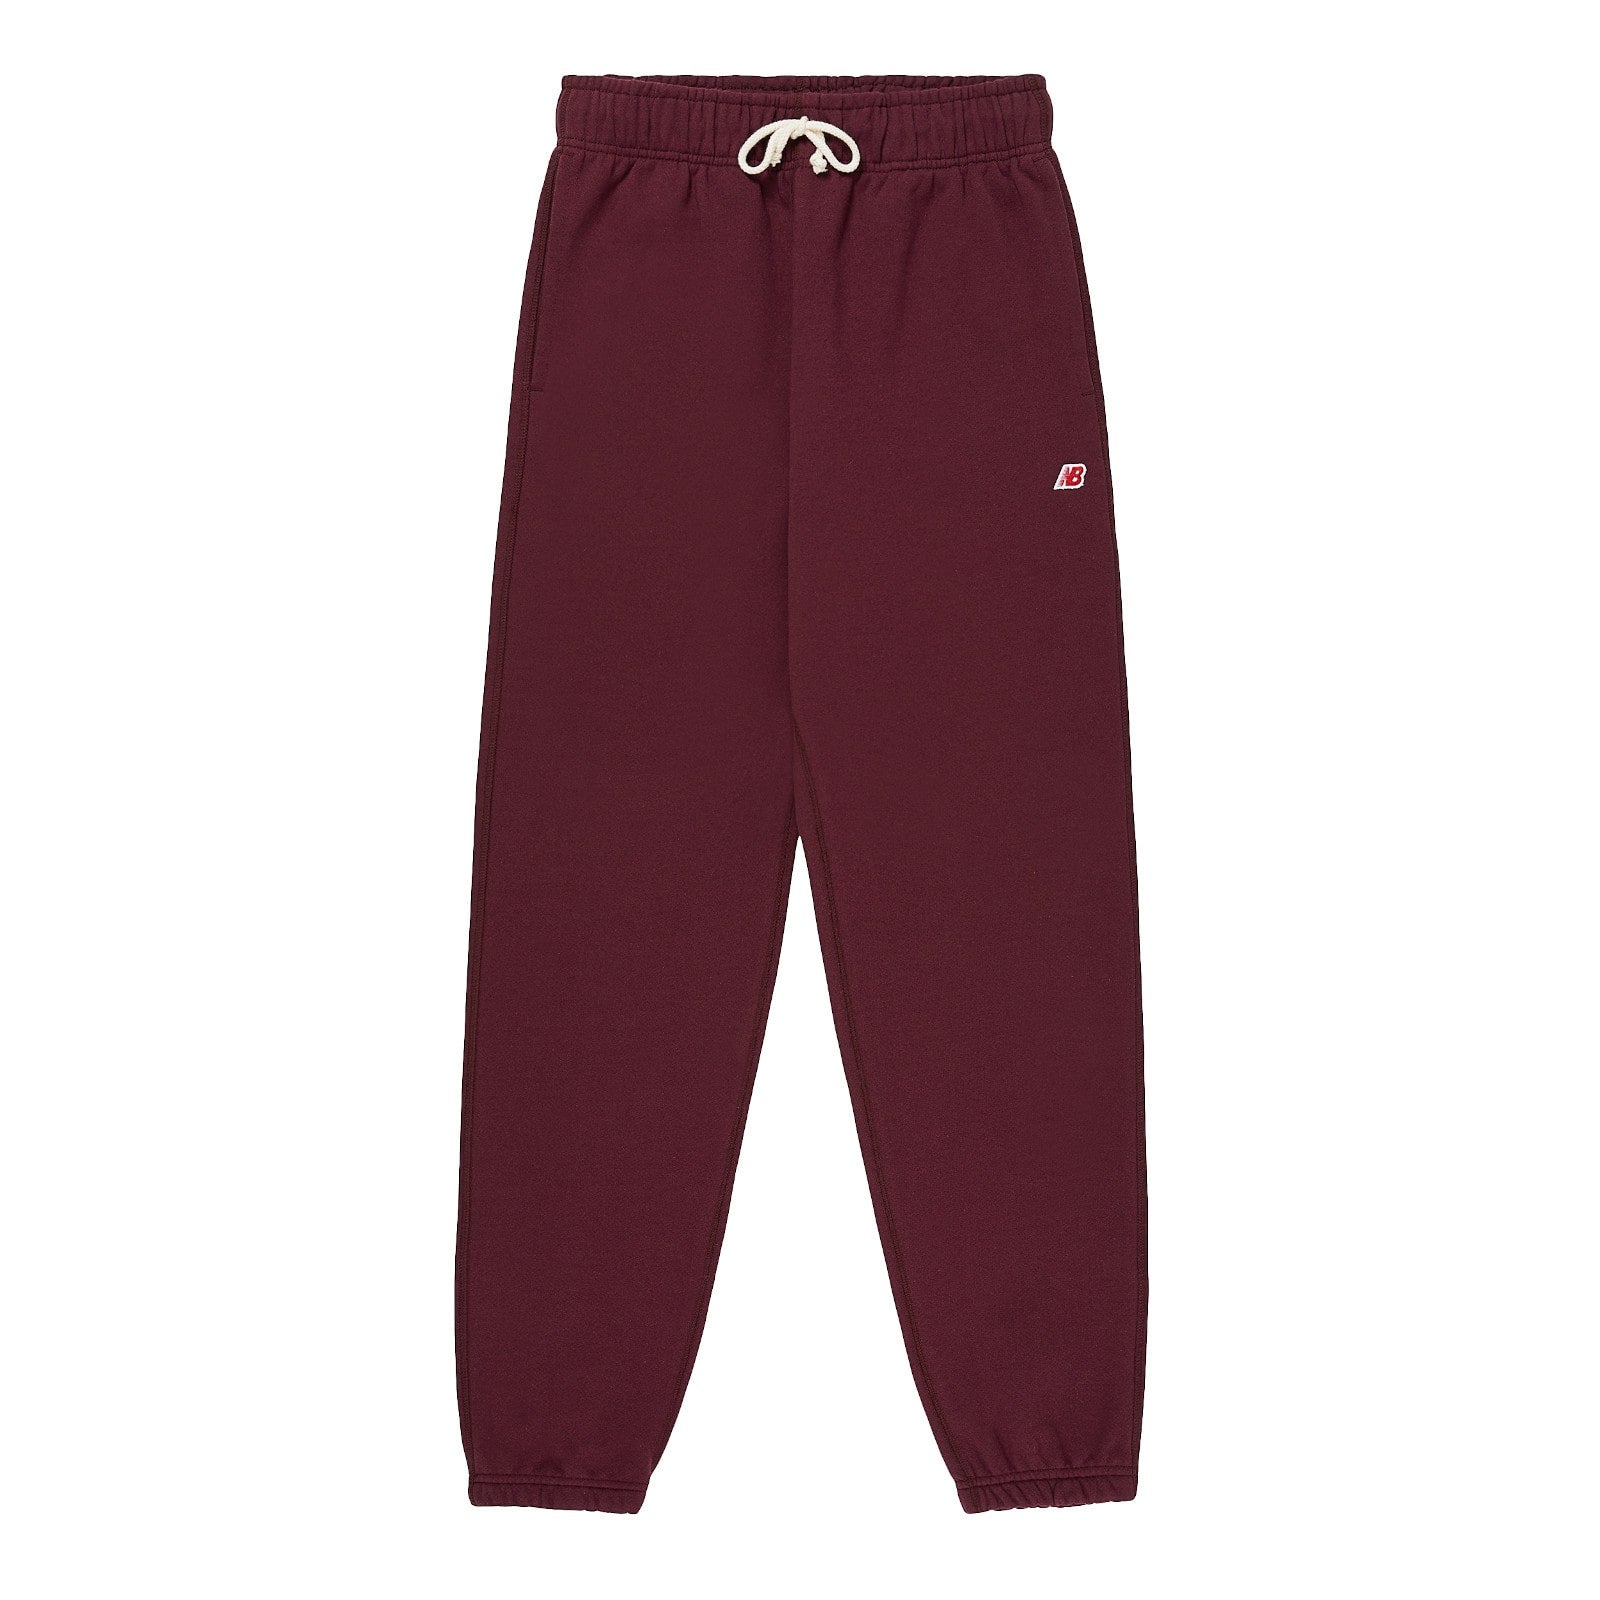 NB公式】ニューバランス | MADE in USA Core Sweatpant|New Balance ...